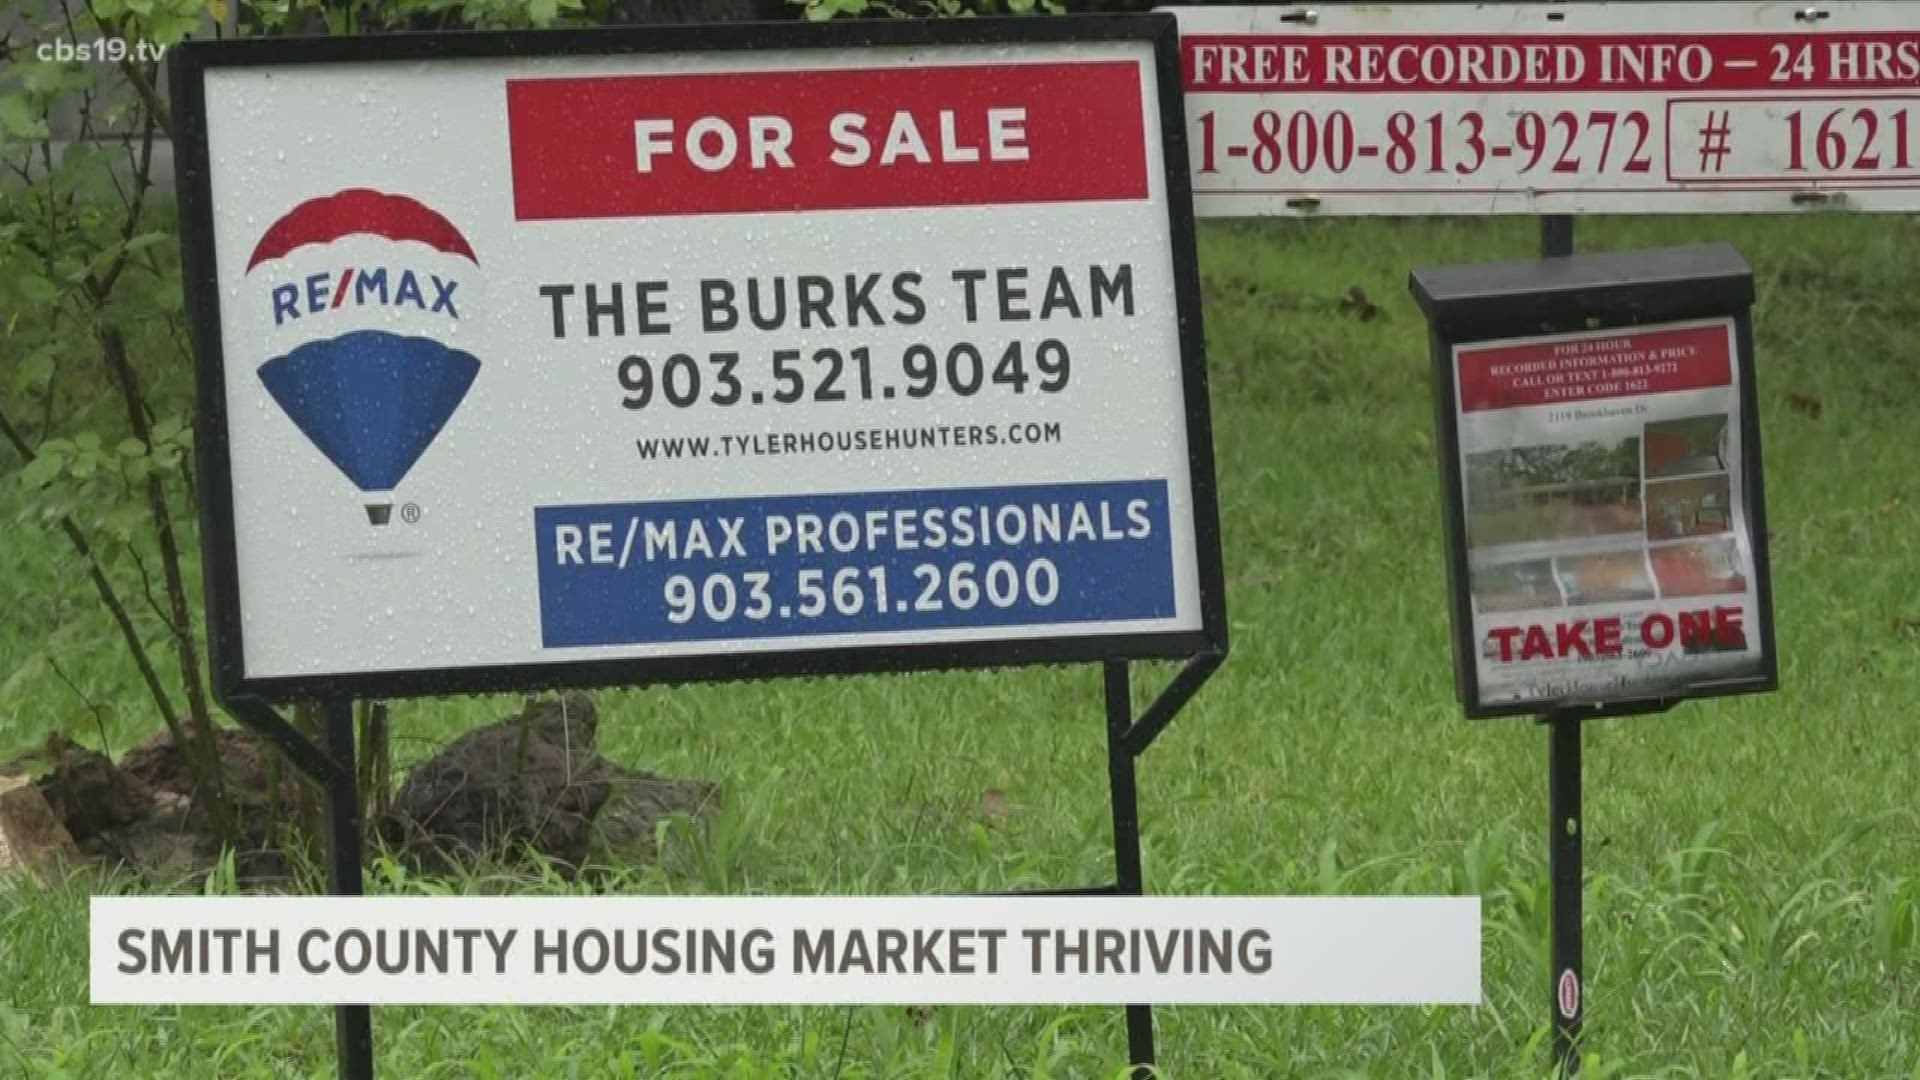 Local Realtors believe the pandemic has increased demand as people take stock of what they want and need in a home.